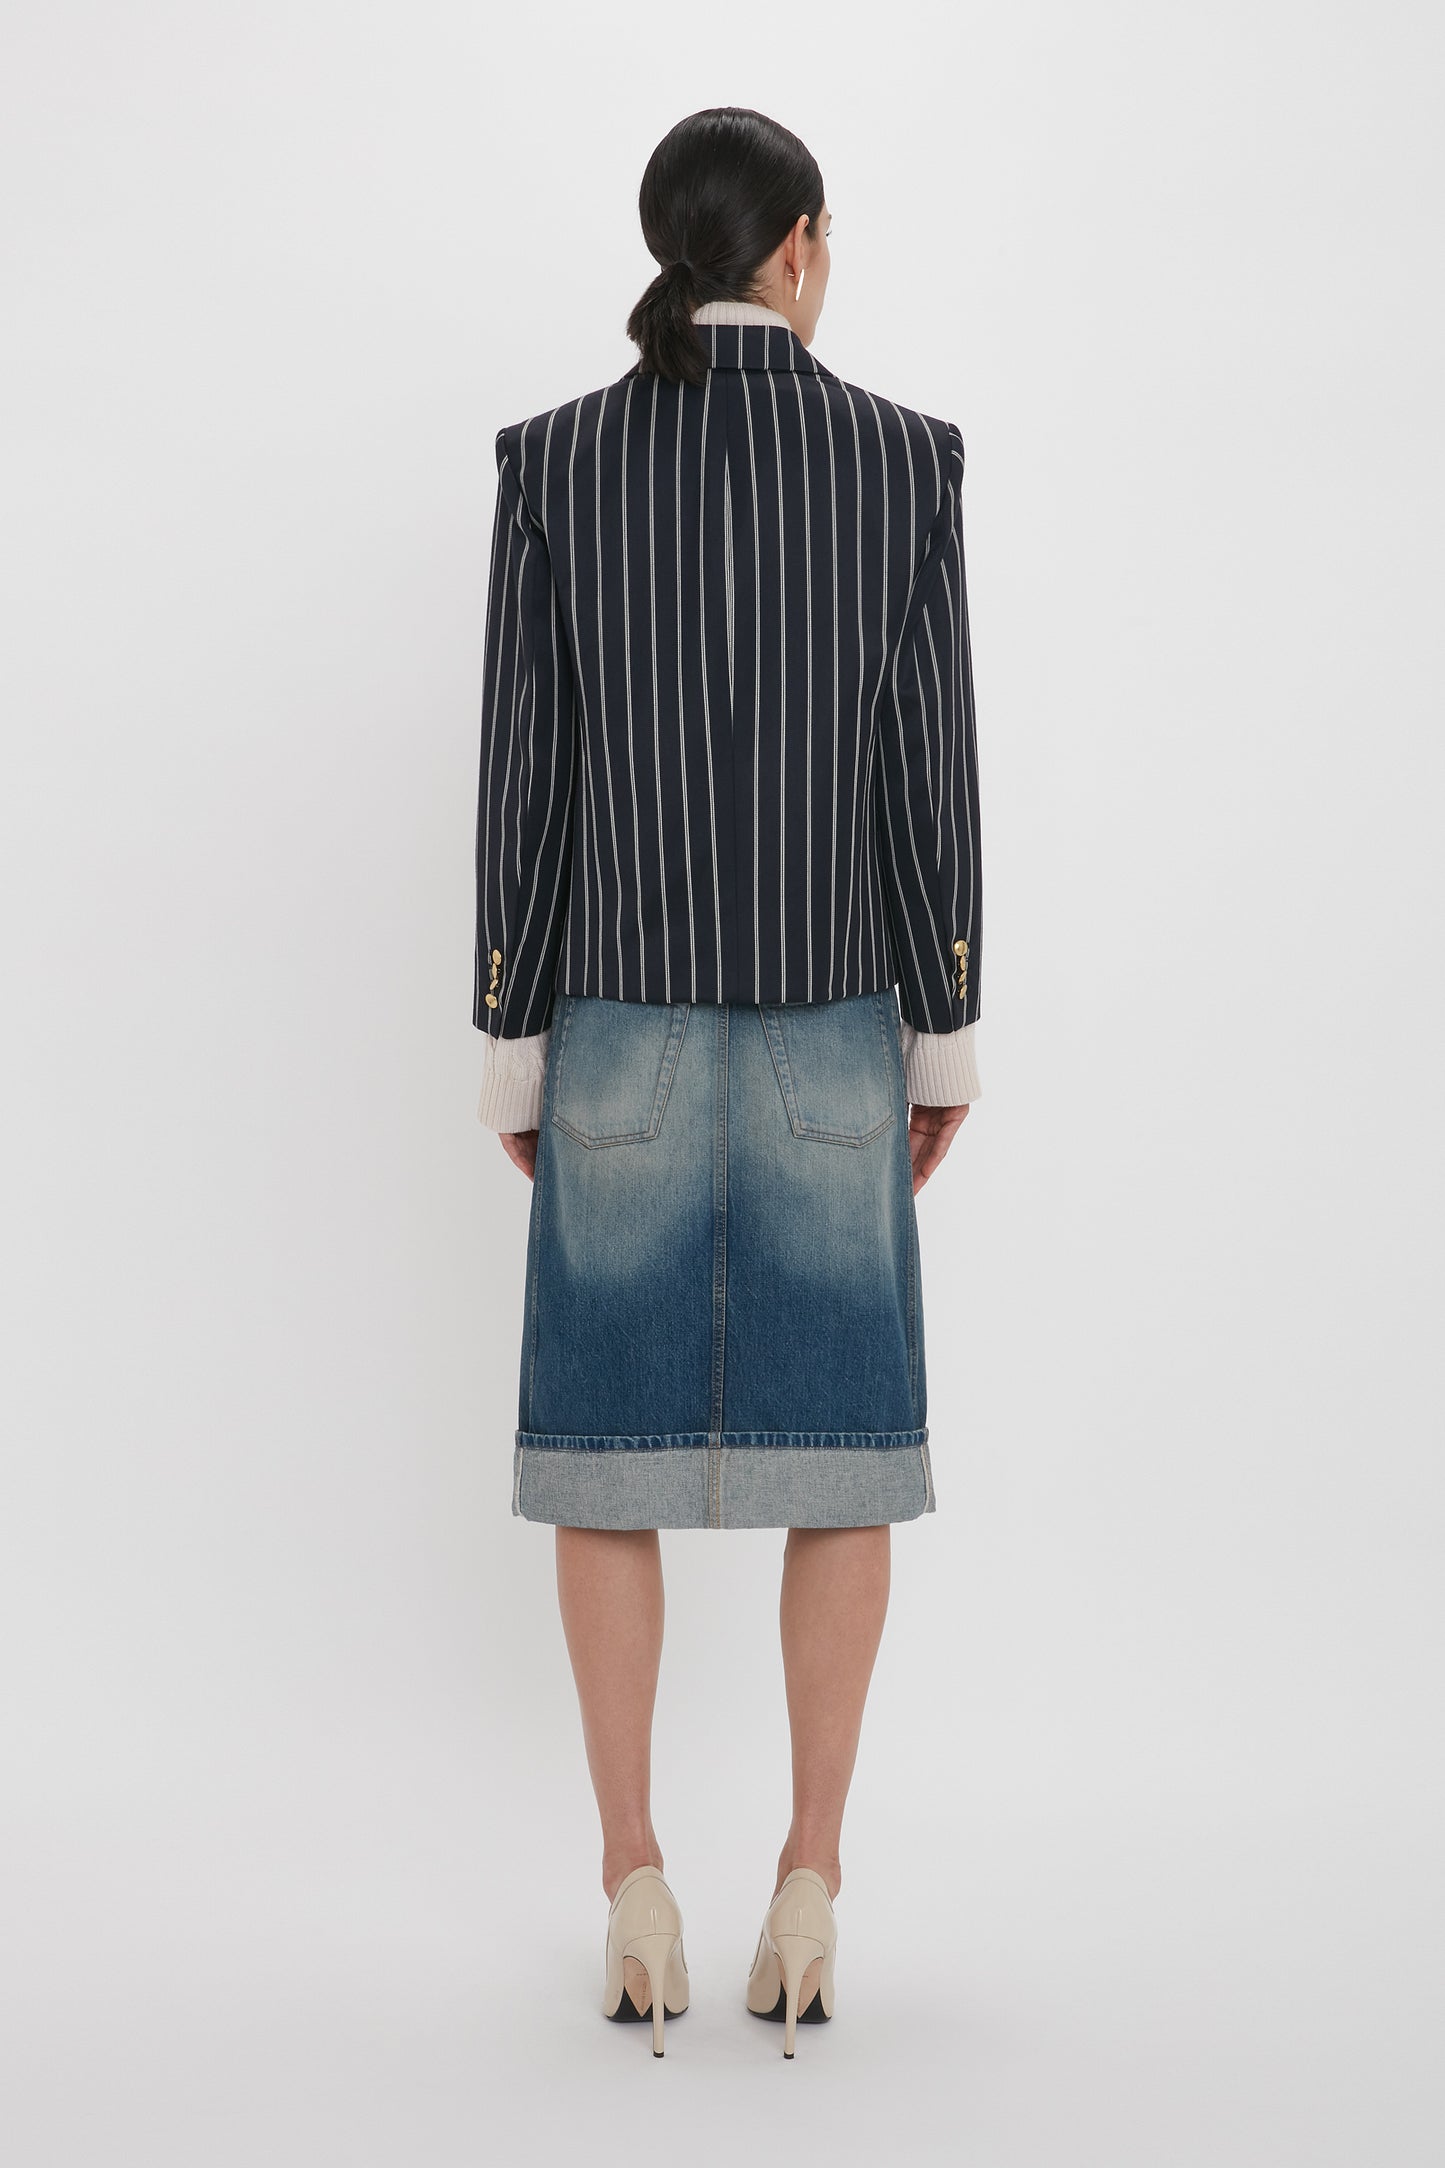 A person with long dark hair wearing a pinstriped blazer, a Placket Detail Denim Skirt In Heavy Vintage Indigo Wash by Victoria Beckham, and high heels stands facing a white background.